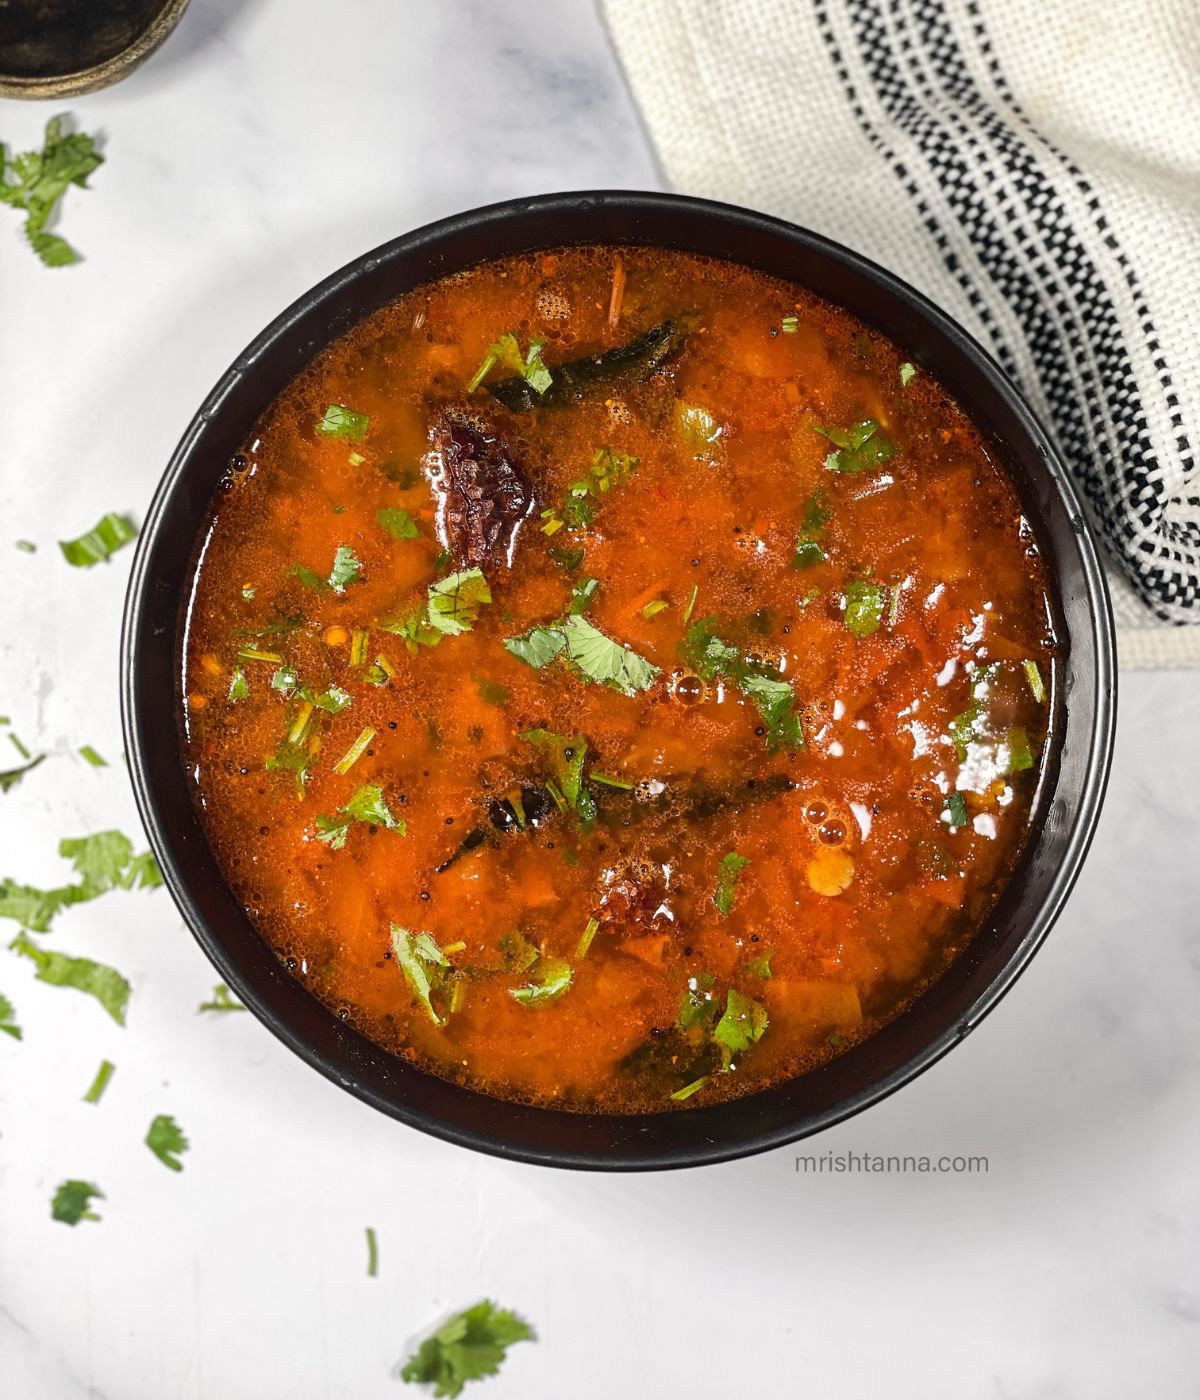 A bowl of tomato rasam is on the table.